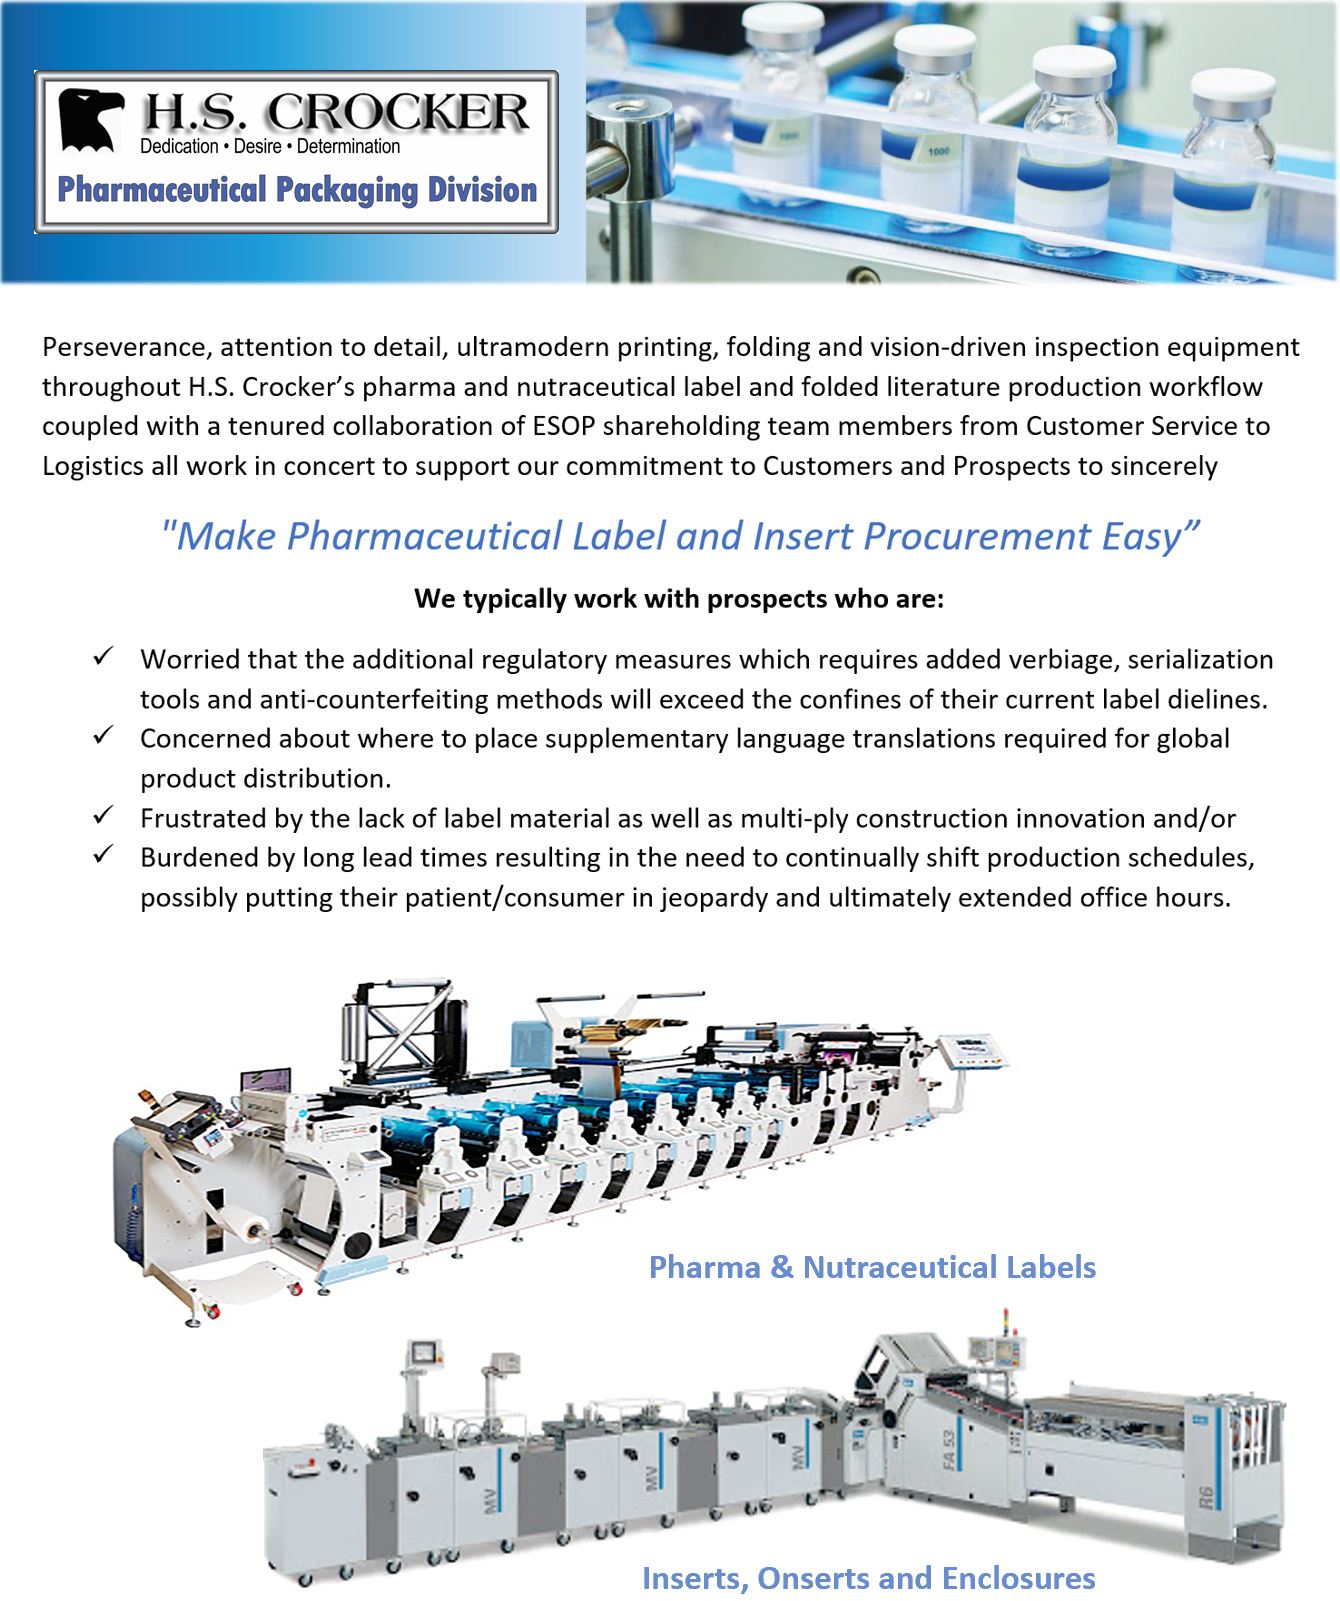 Brief Overview of H.S. Crocker's Pharmaceutical Packaging Division